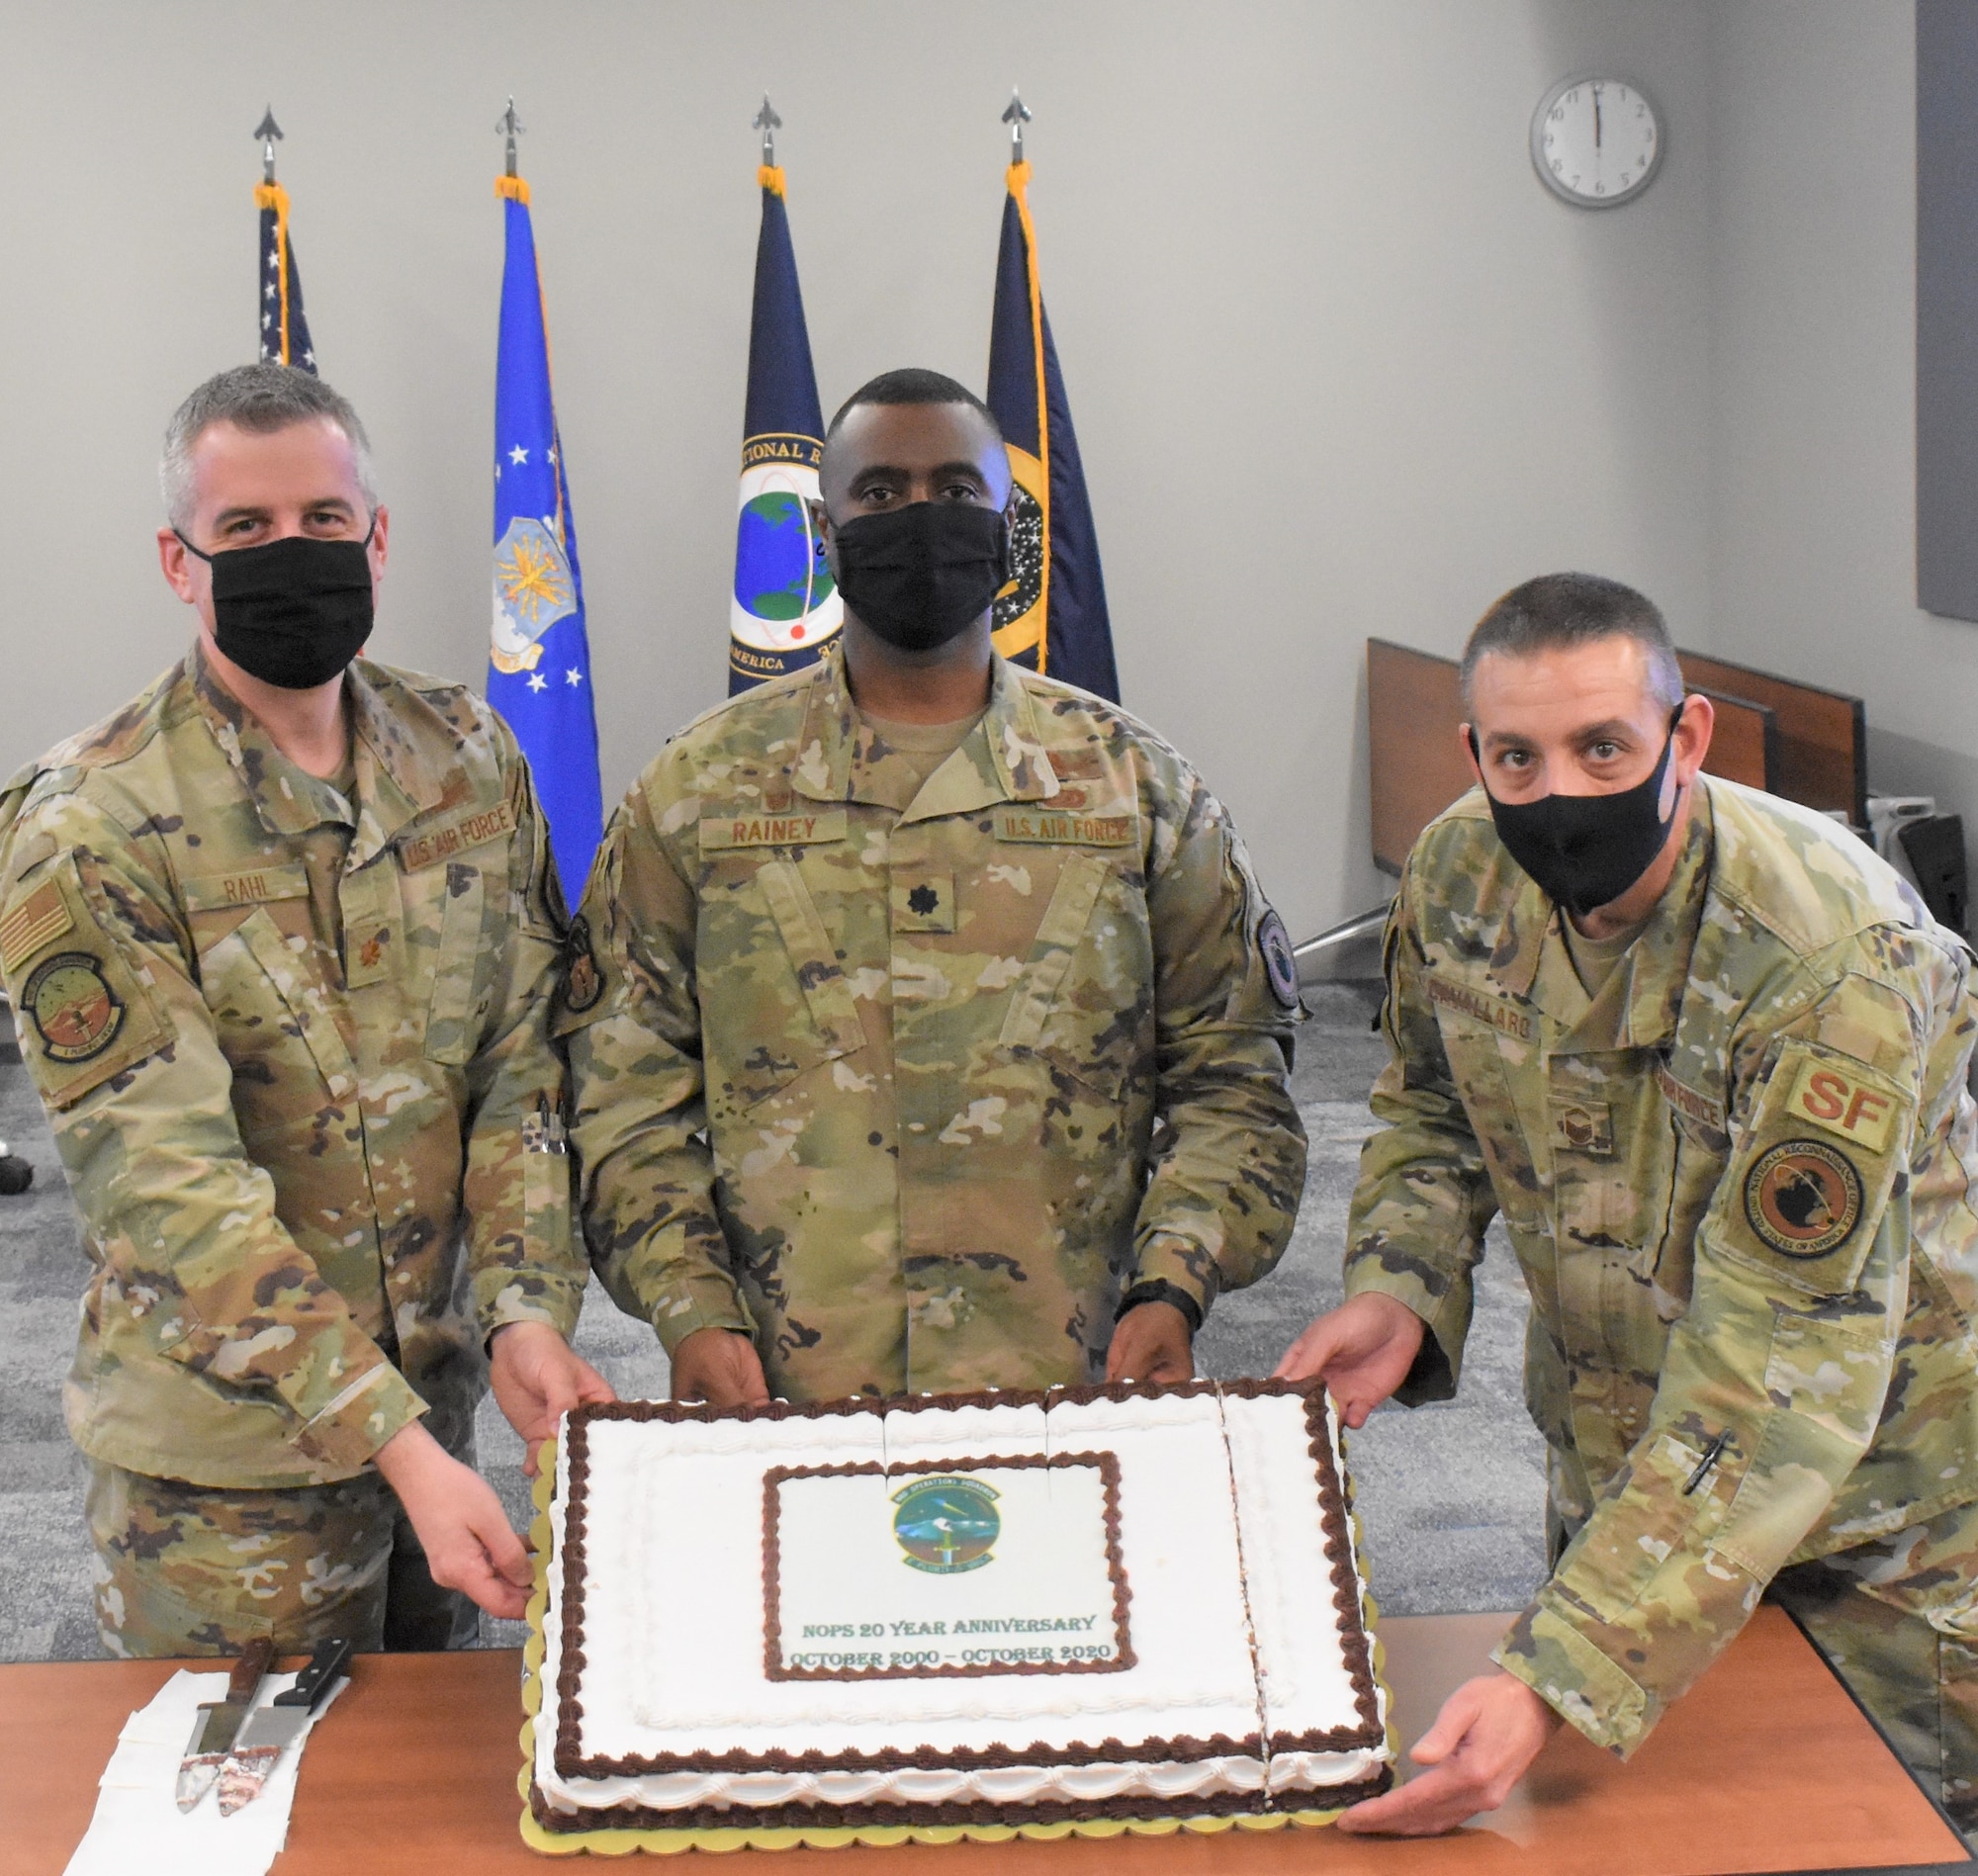 From left, Maj. David Rahl, National Reconnaissance Office Operations Squadron director of operations, Lt. Col. Roland Rainey, NOPS commander and Senior Master Sgt. Joseph Cavallaro, NOPS superintendent, hold a cake recognizing the NOPS’s 20th anniversary Oct. 30, 2020, at Schriever Air Force Base, Colorado. The NOPS employs global resources to provide critical connectivity and telemetry, tracking and command data while serving as the single NRO interface to the Air Force Satellite Control Network. (U.S. Space Force courtesy photo)